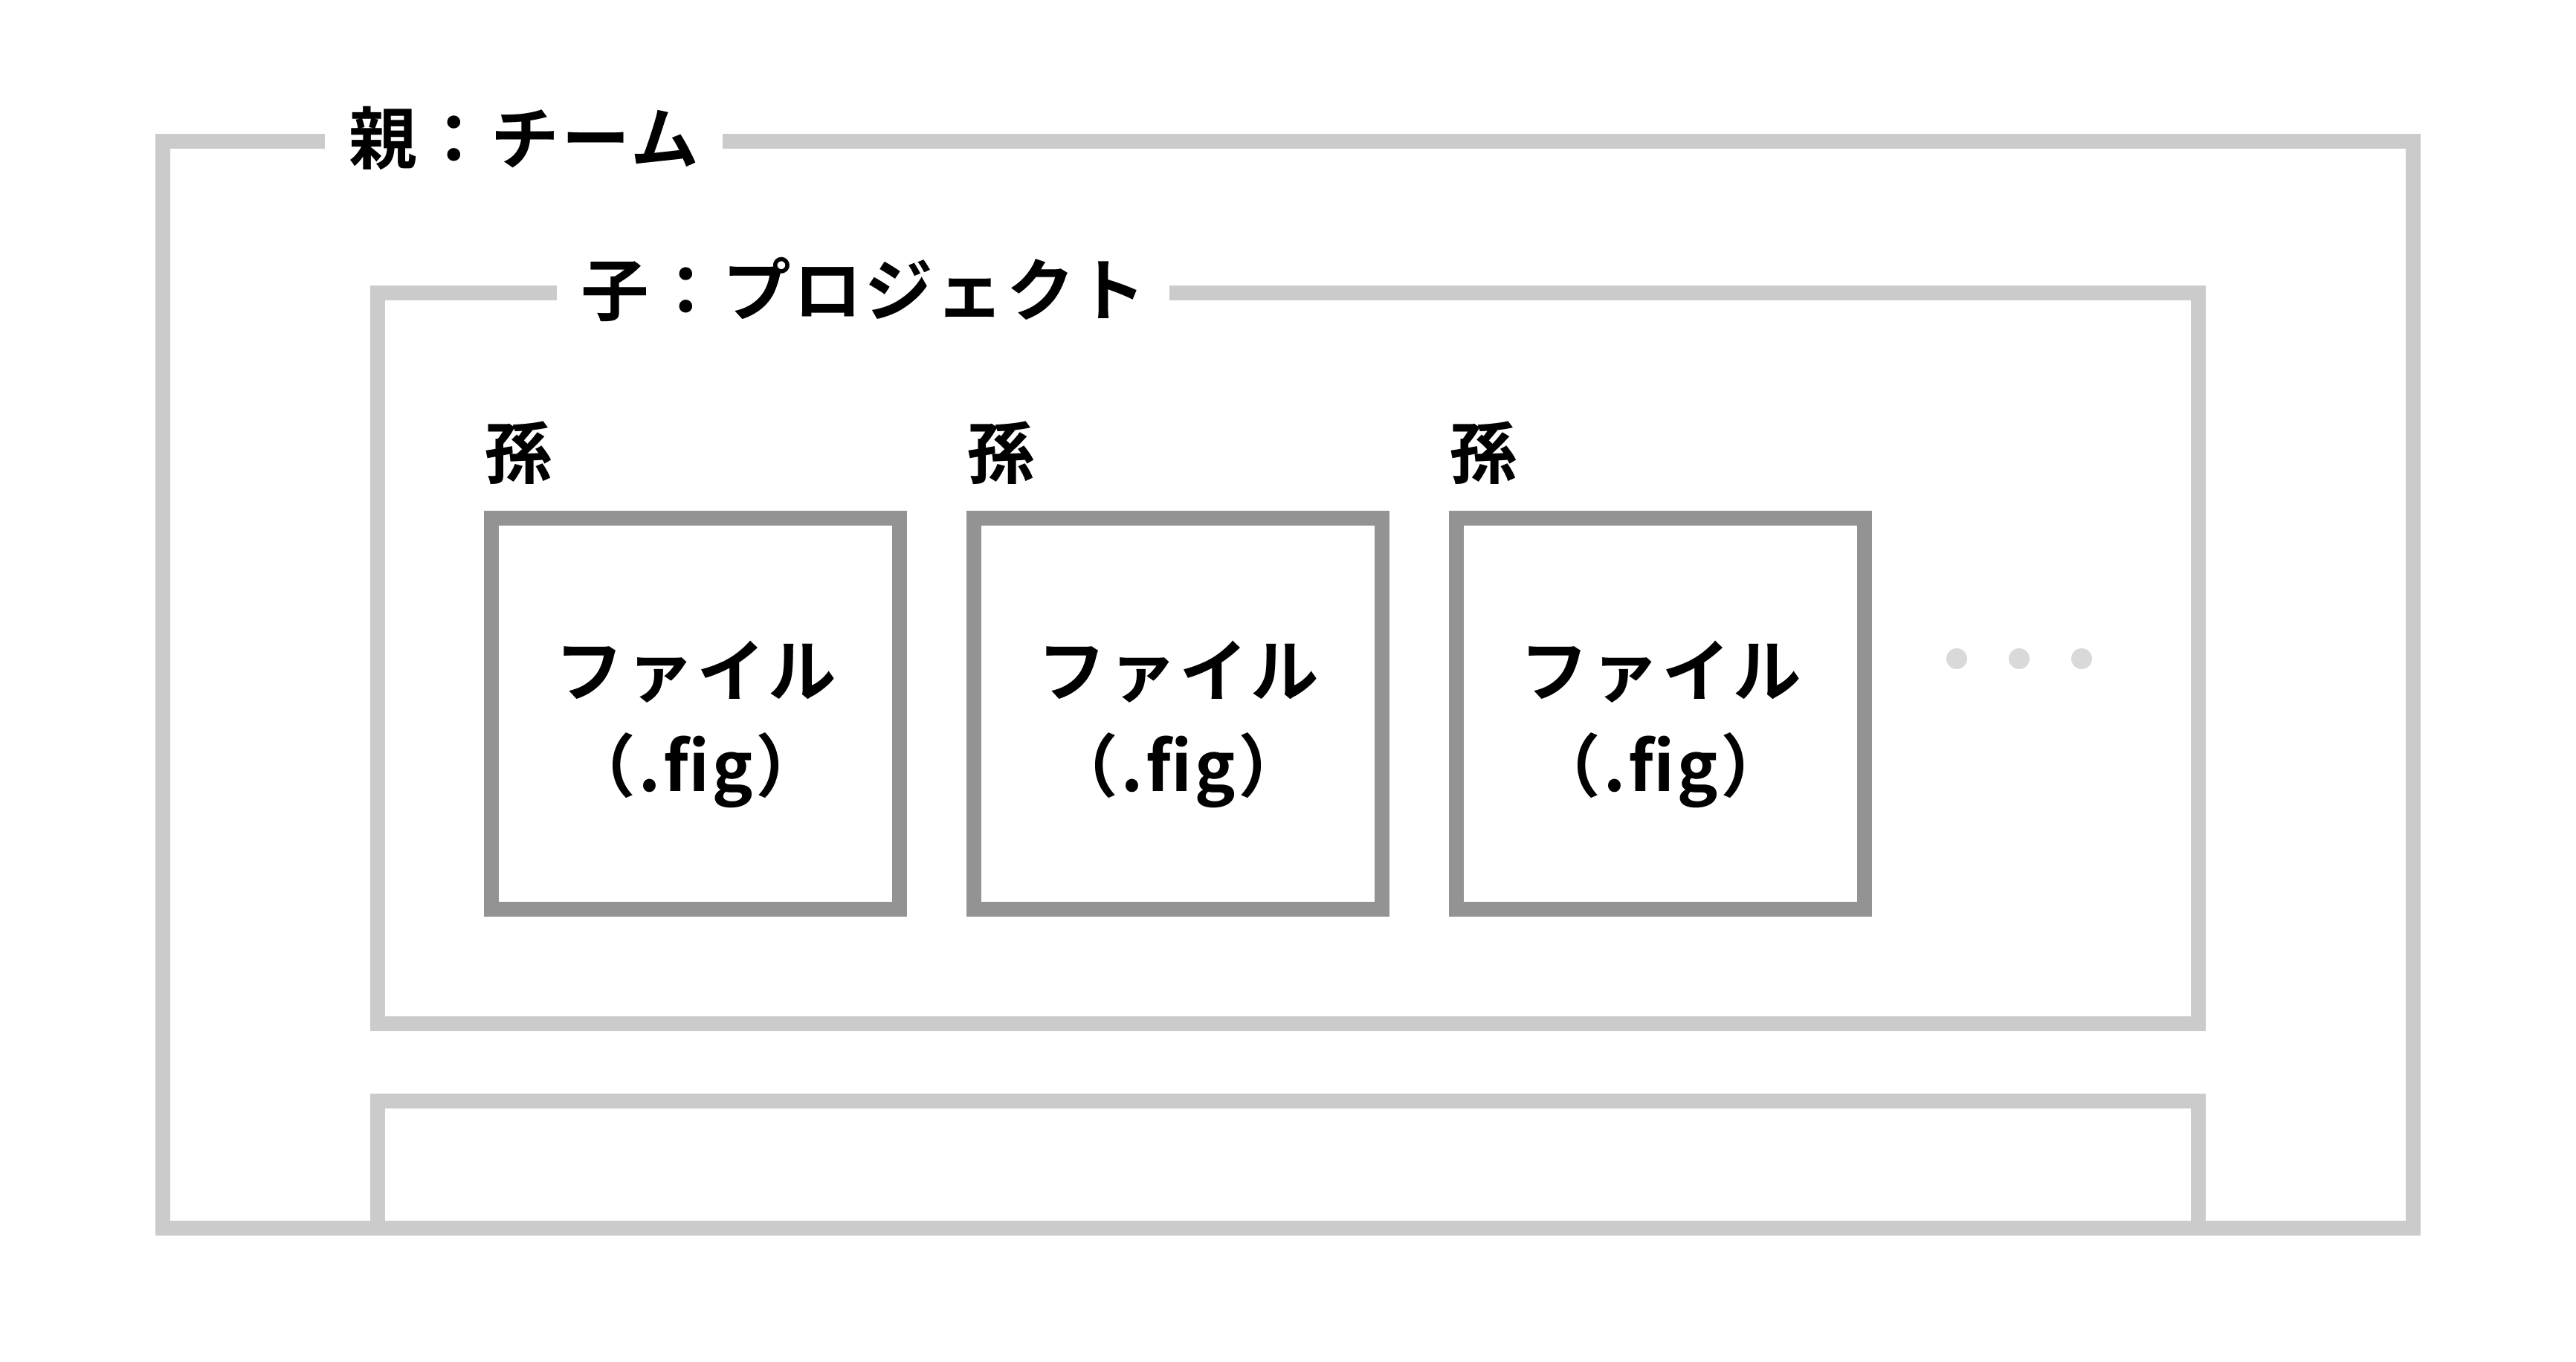 figma-basics-structure-1.png